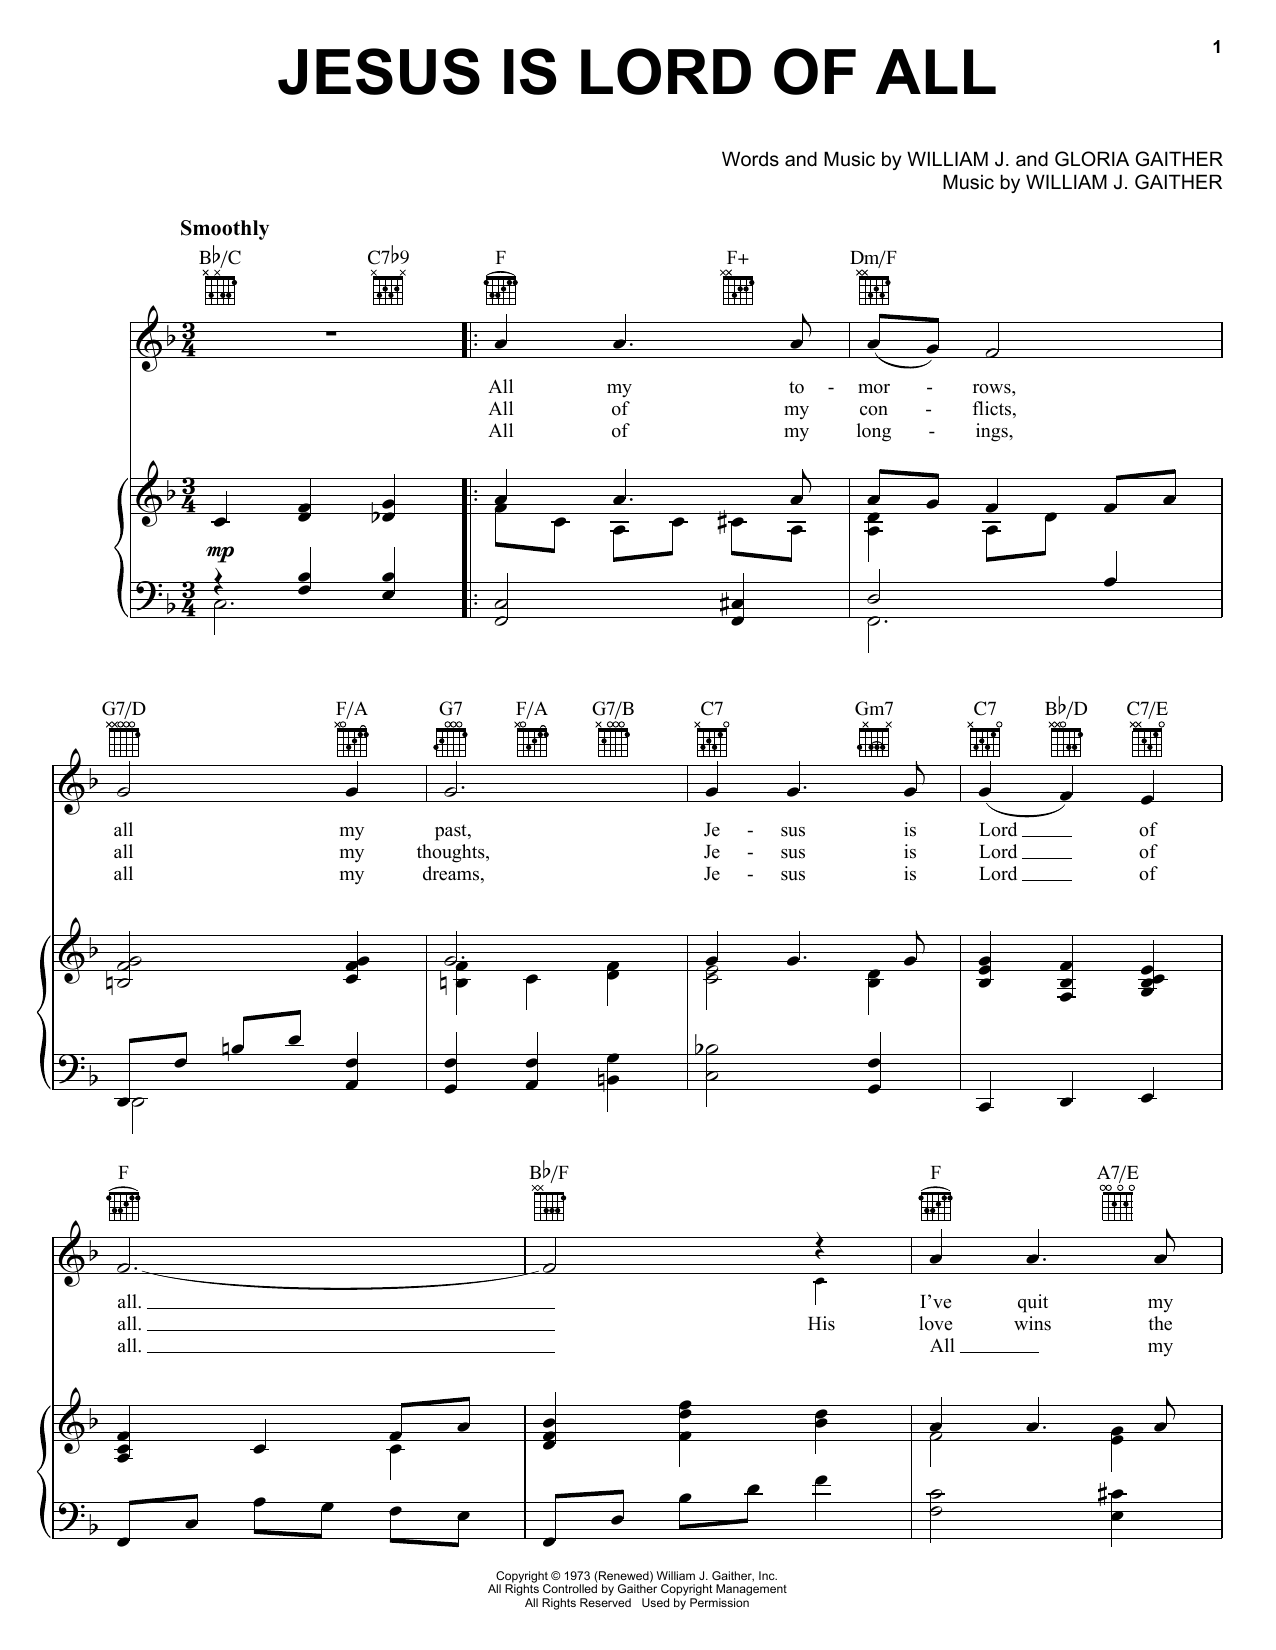 Download Bill & Gloria Gaither Jesus Is Lord Of All Sheet Music